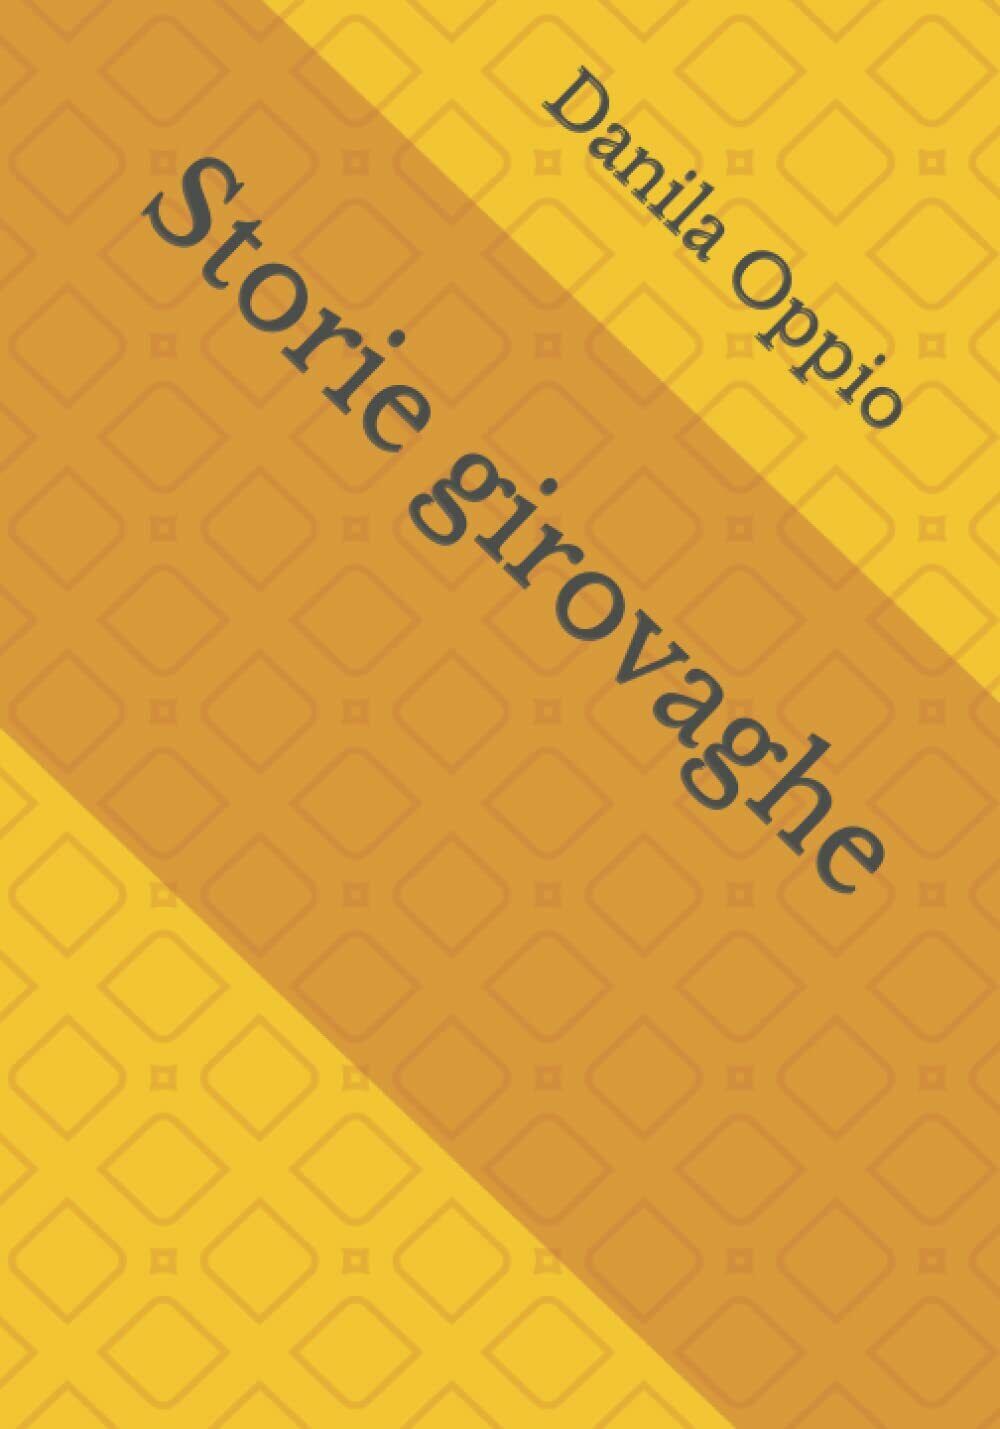 Storie girovaghe di Danila Oppio,  2021,  Indipendently Published